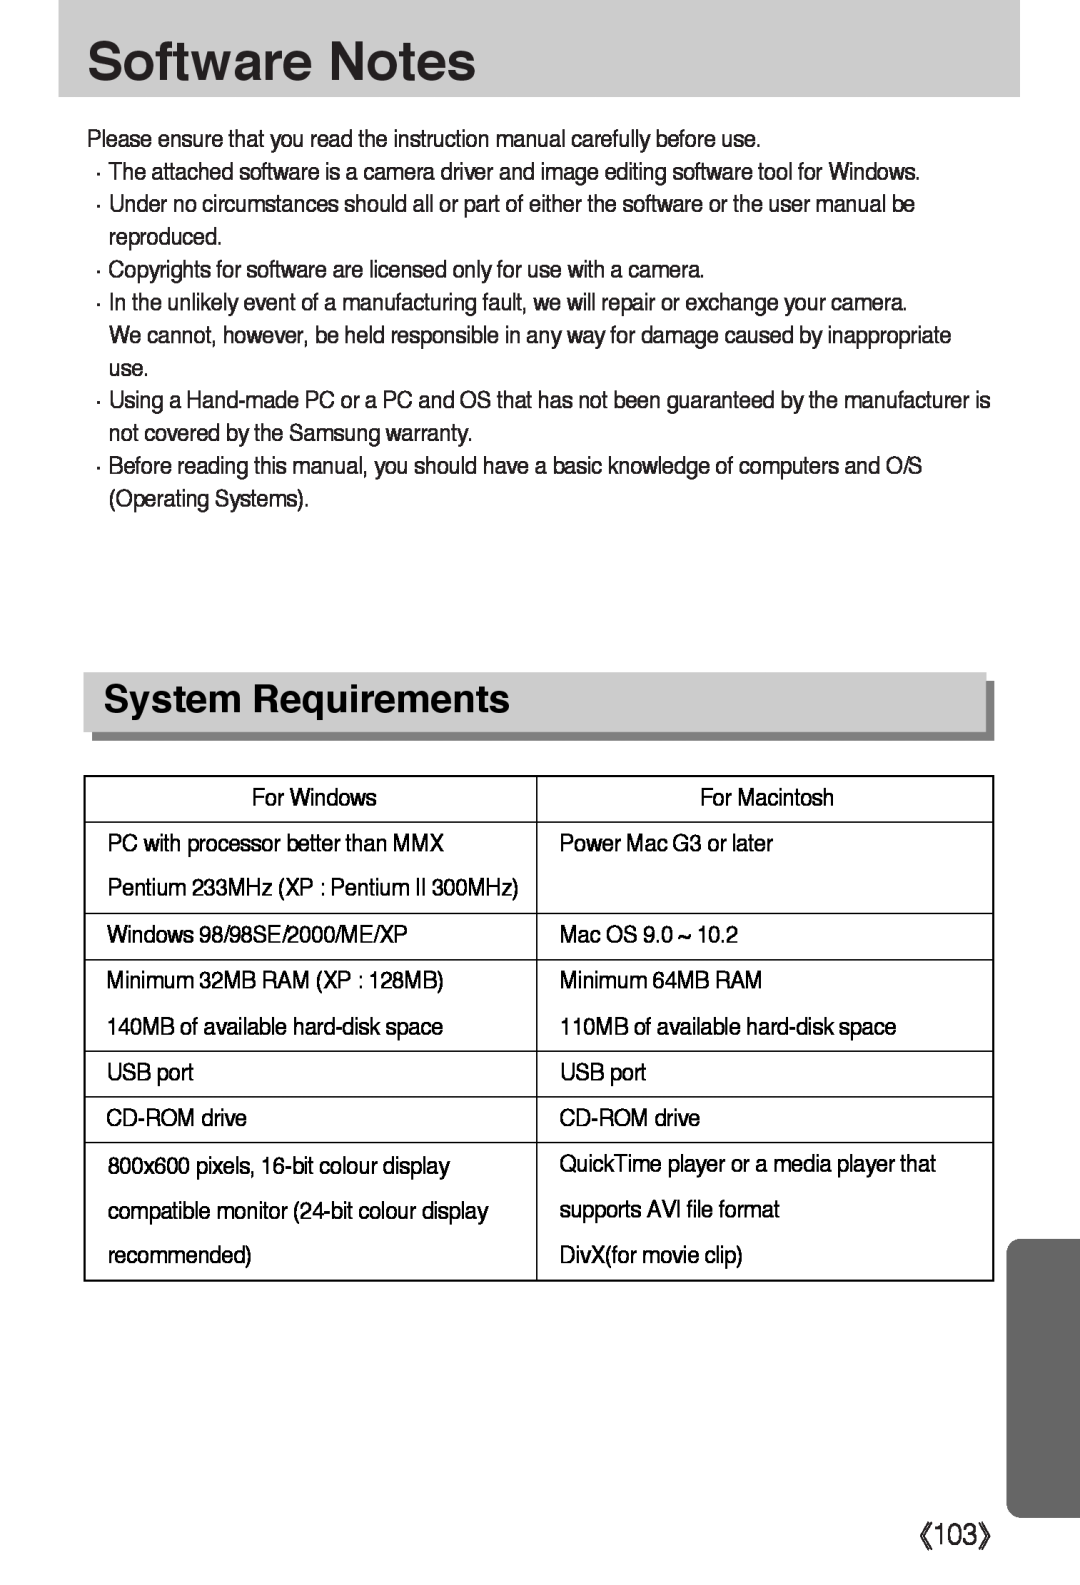 Samsung L50 user manual Software Notes, System Requirements, 《103》 